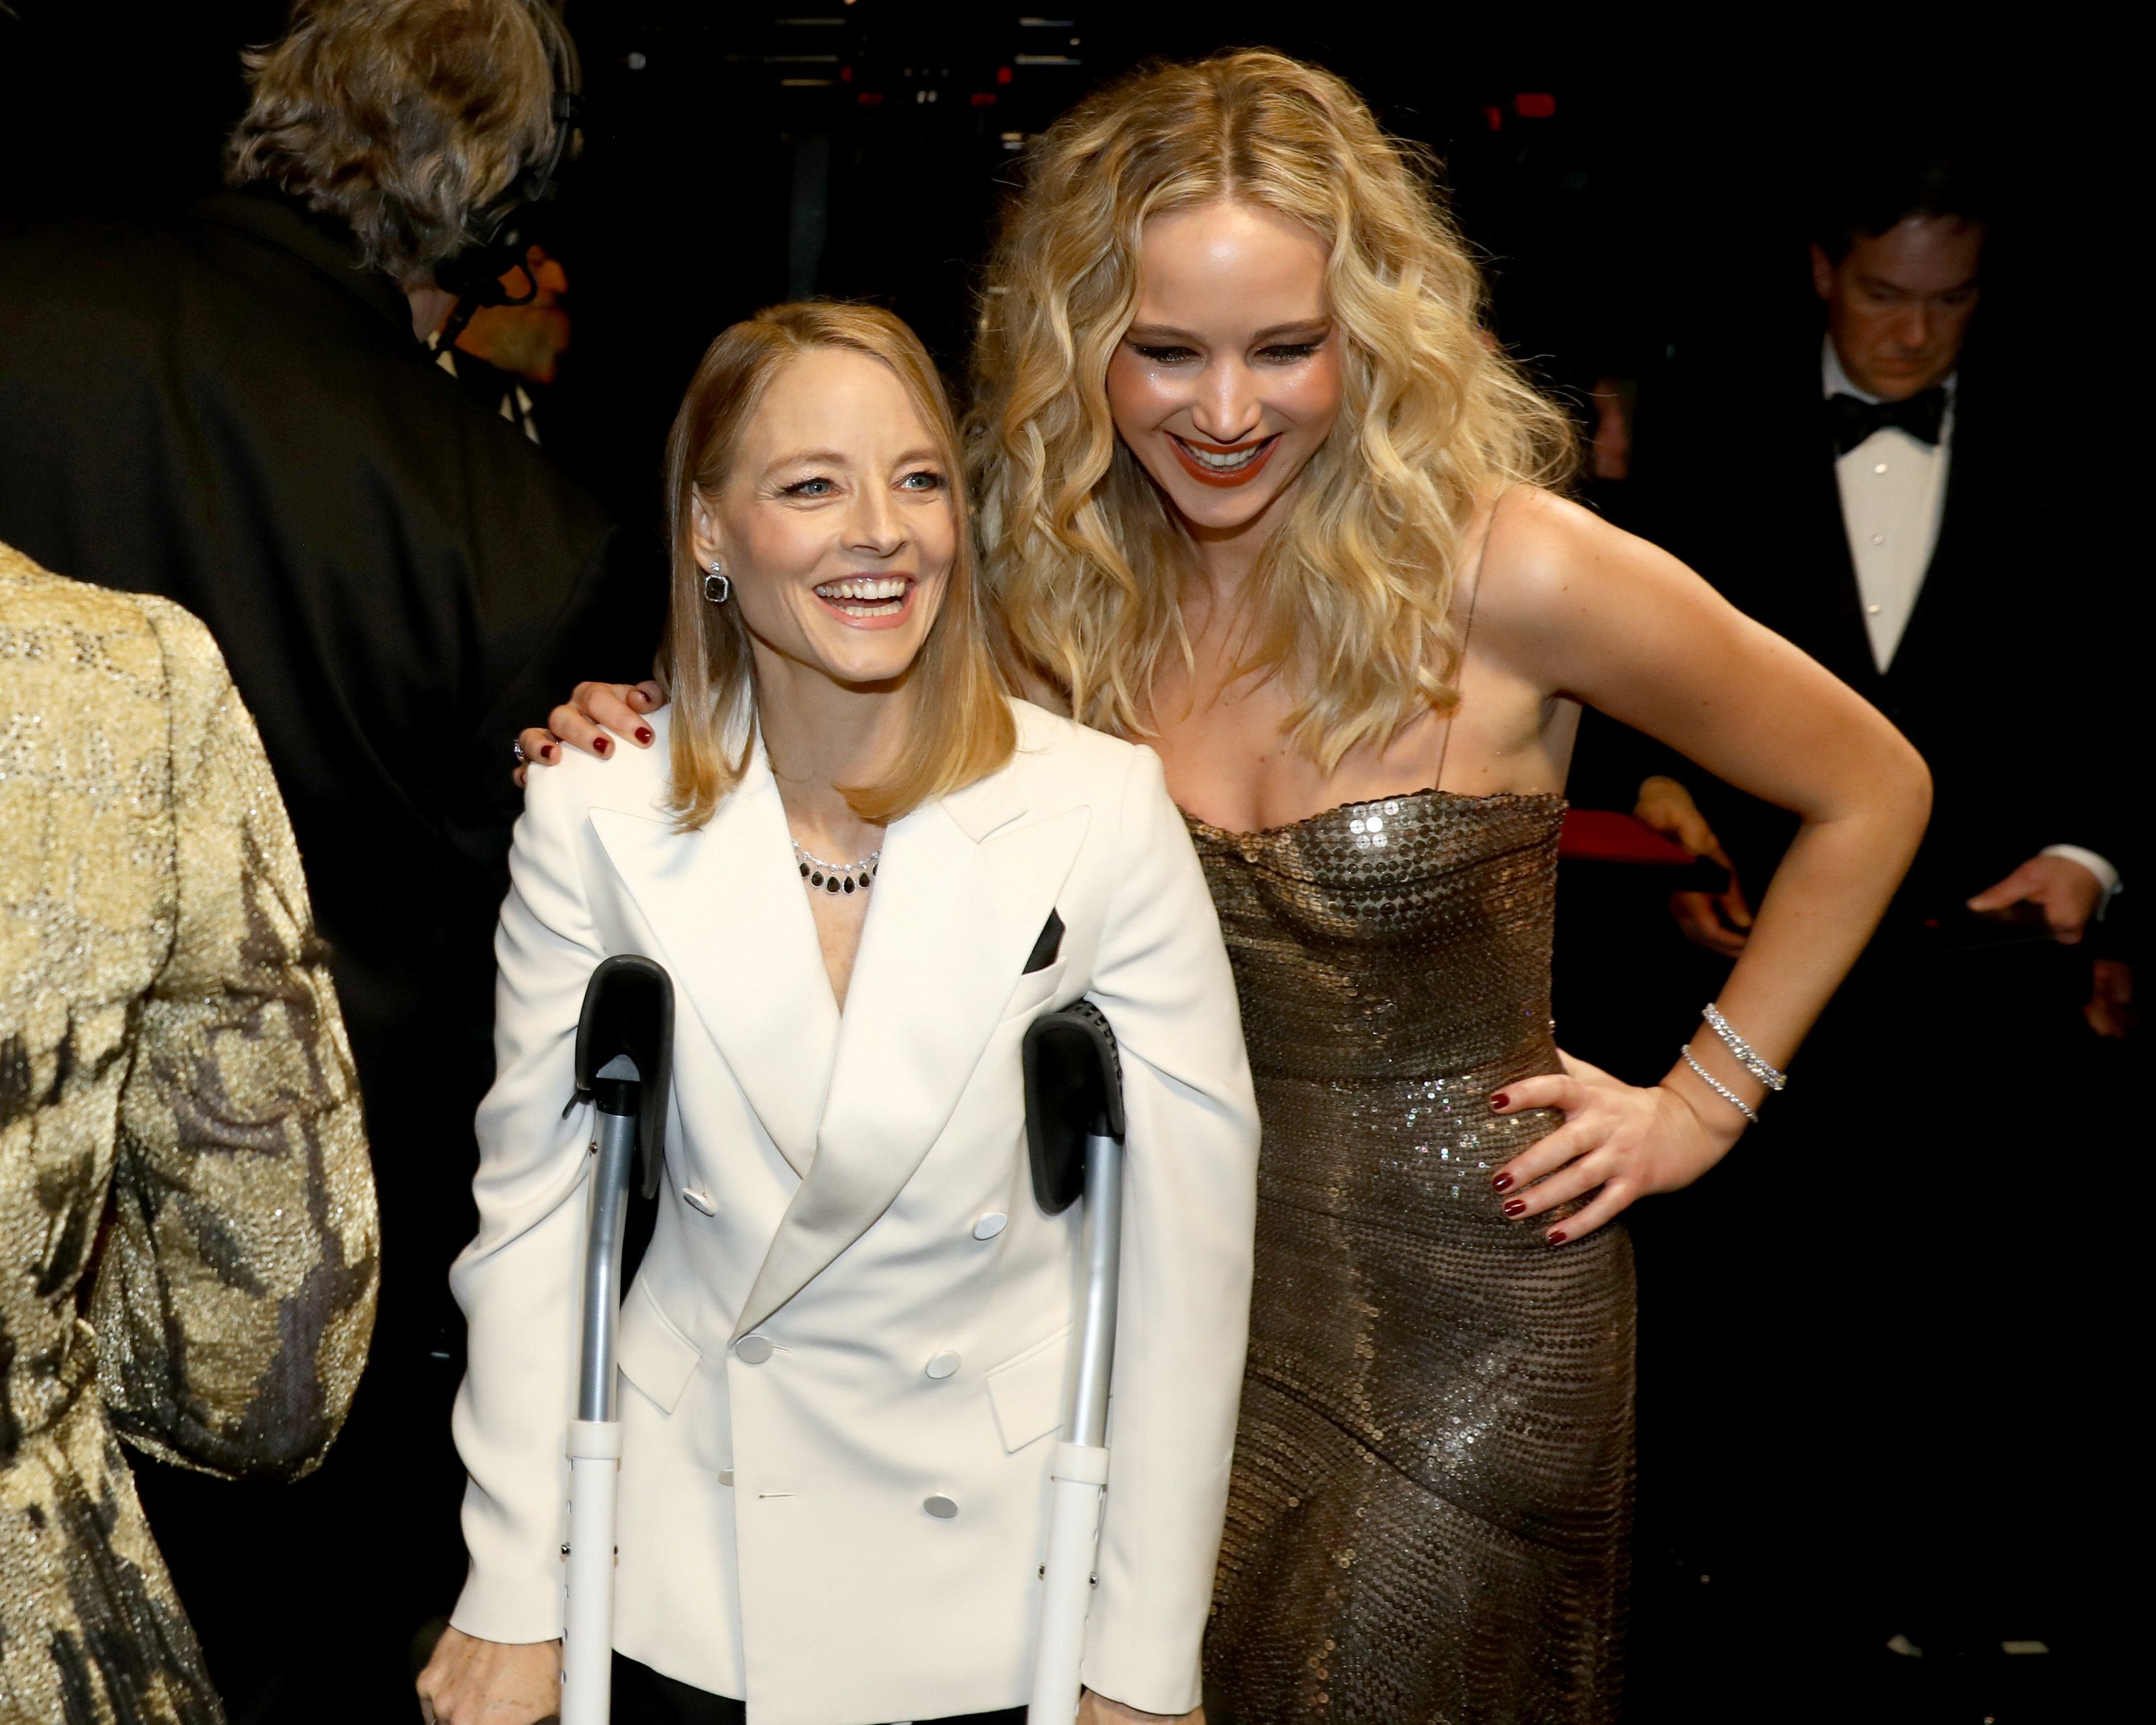 Here's the Real Reason Jodie Foster Needed Crutches at the Oscars